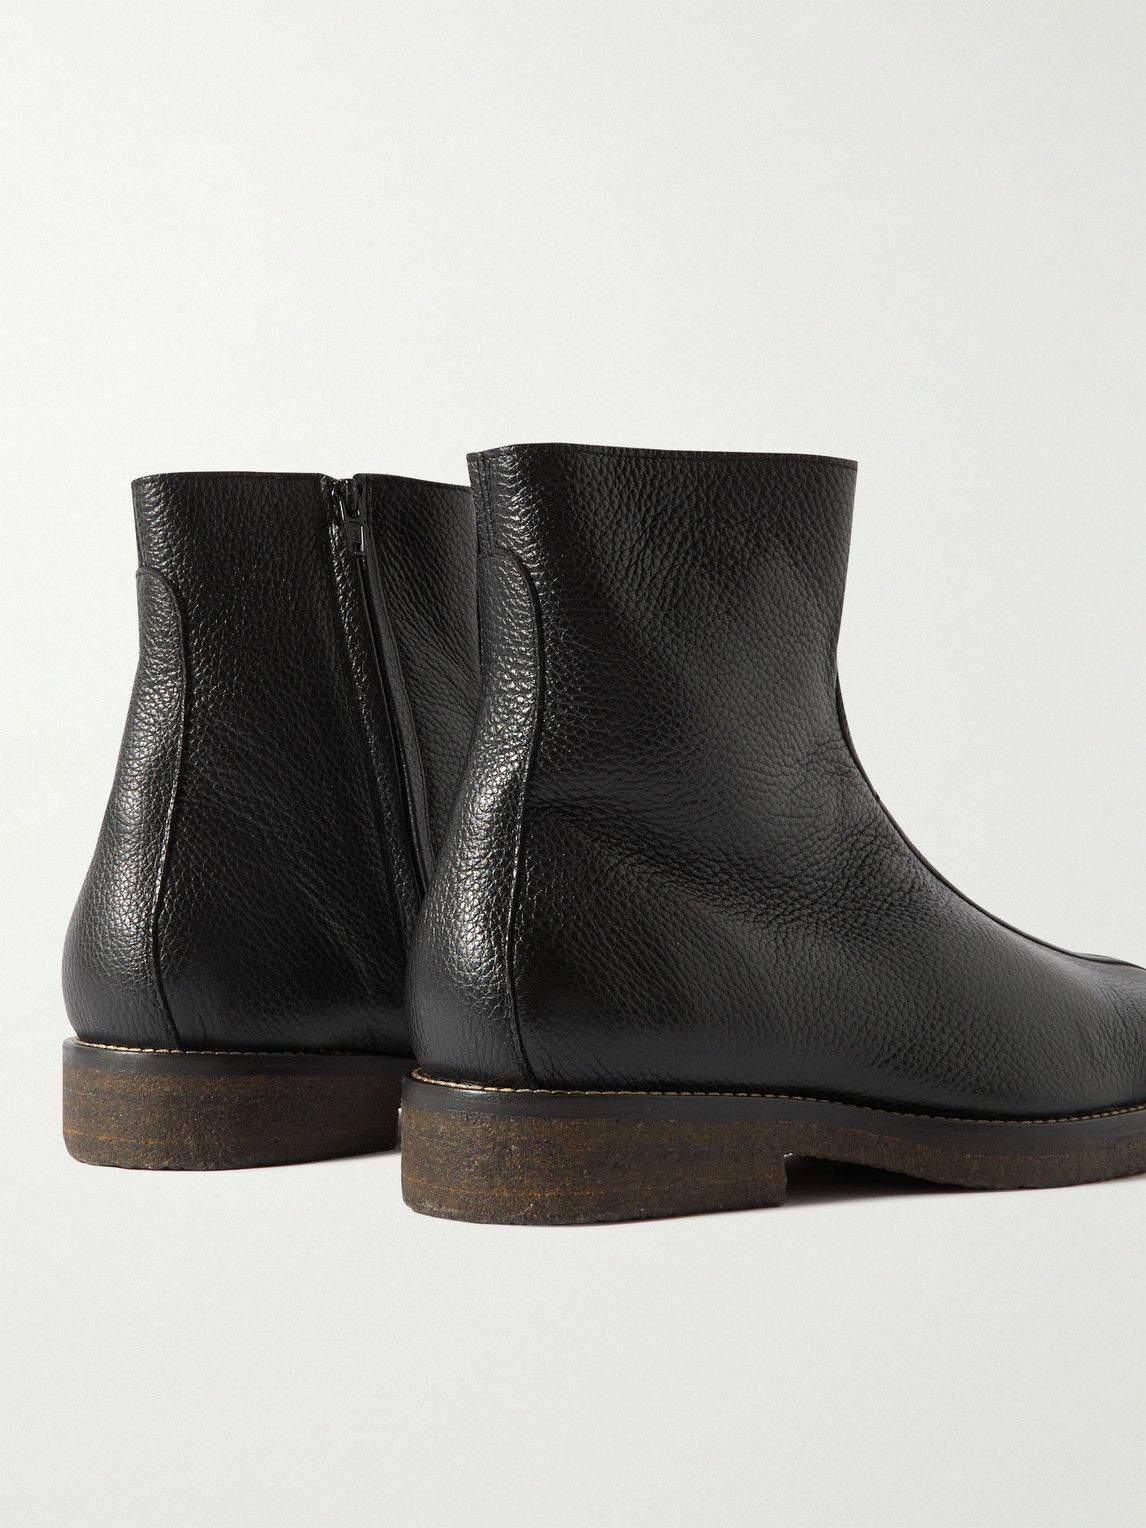 Lemaire - Shearling-Lined Full-Grain Leather Boots - Black Lemaire